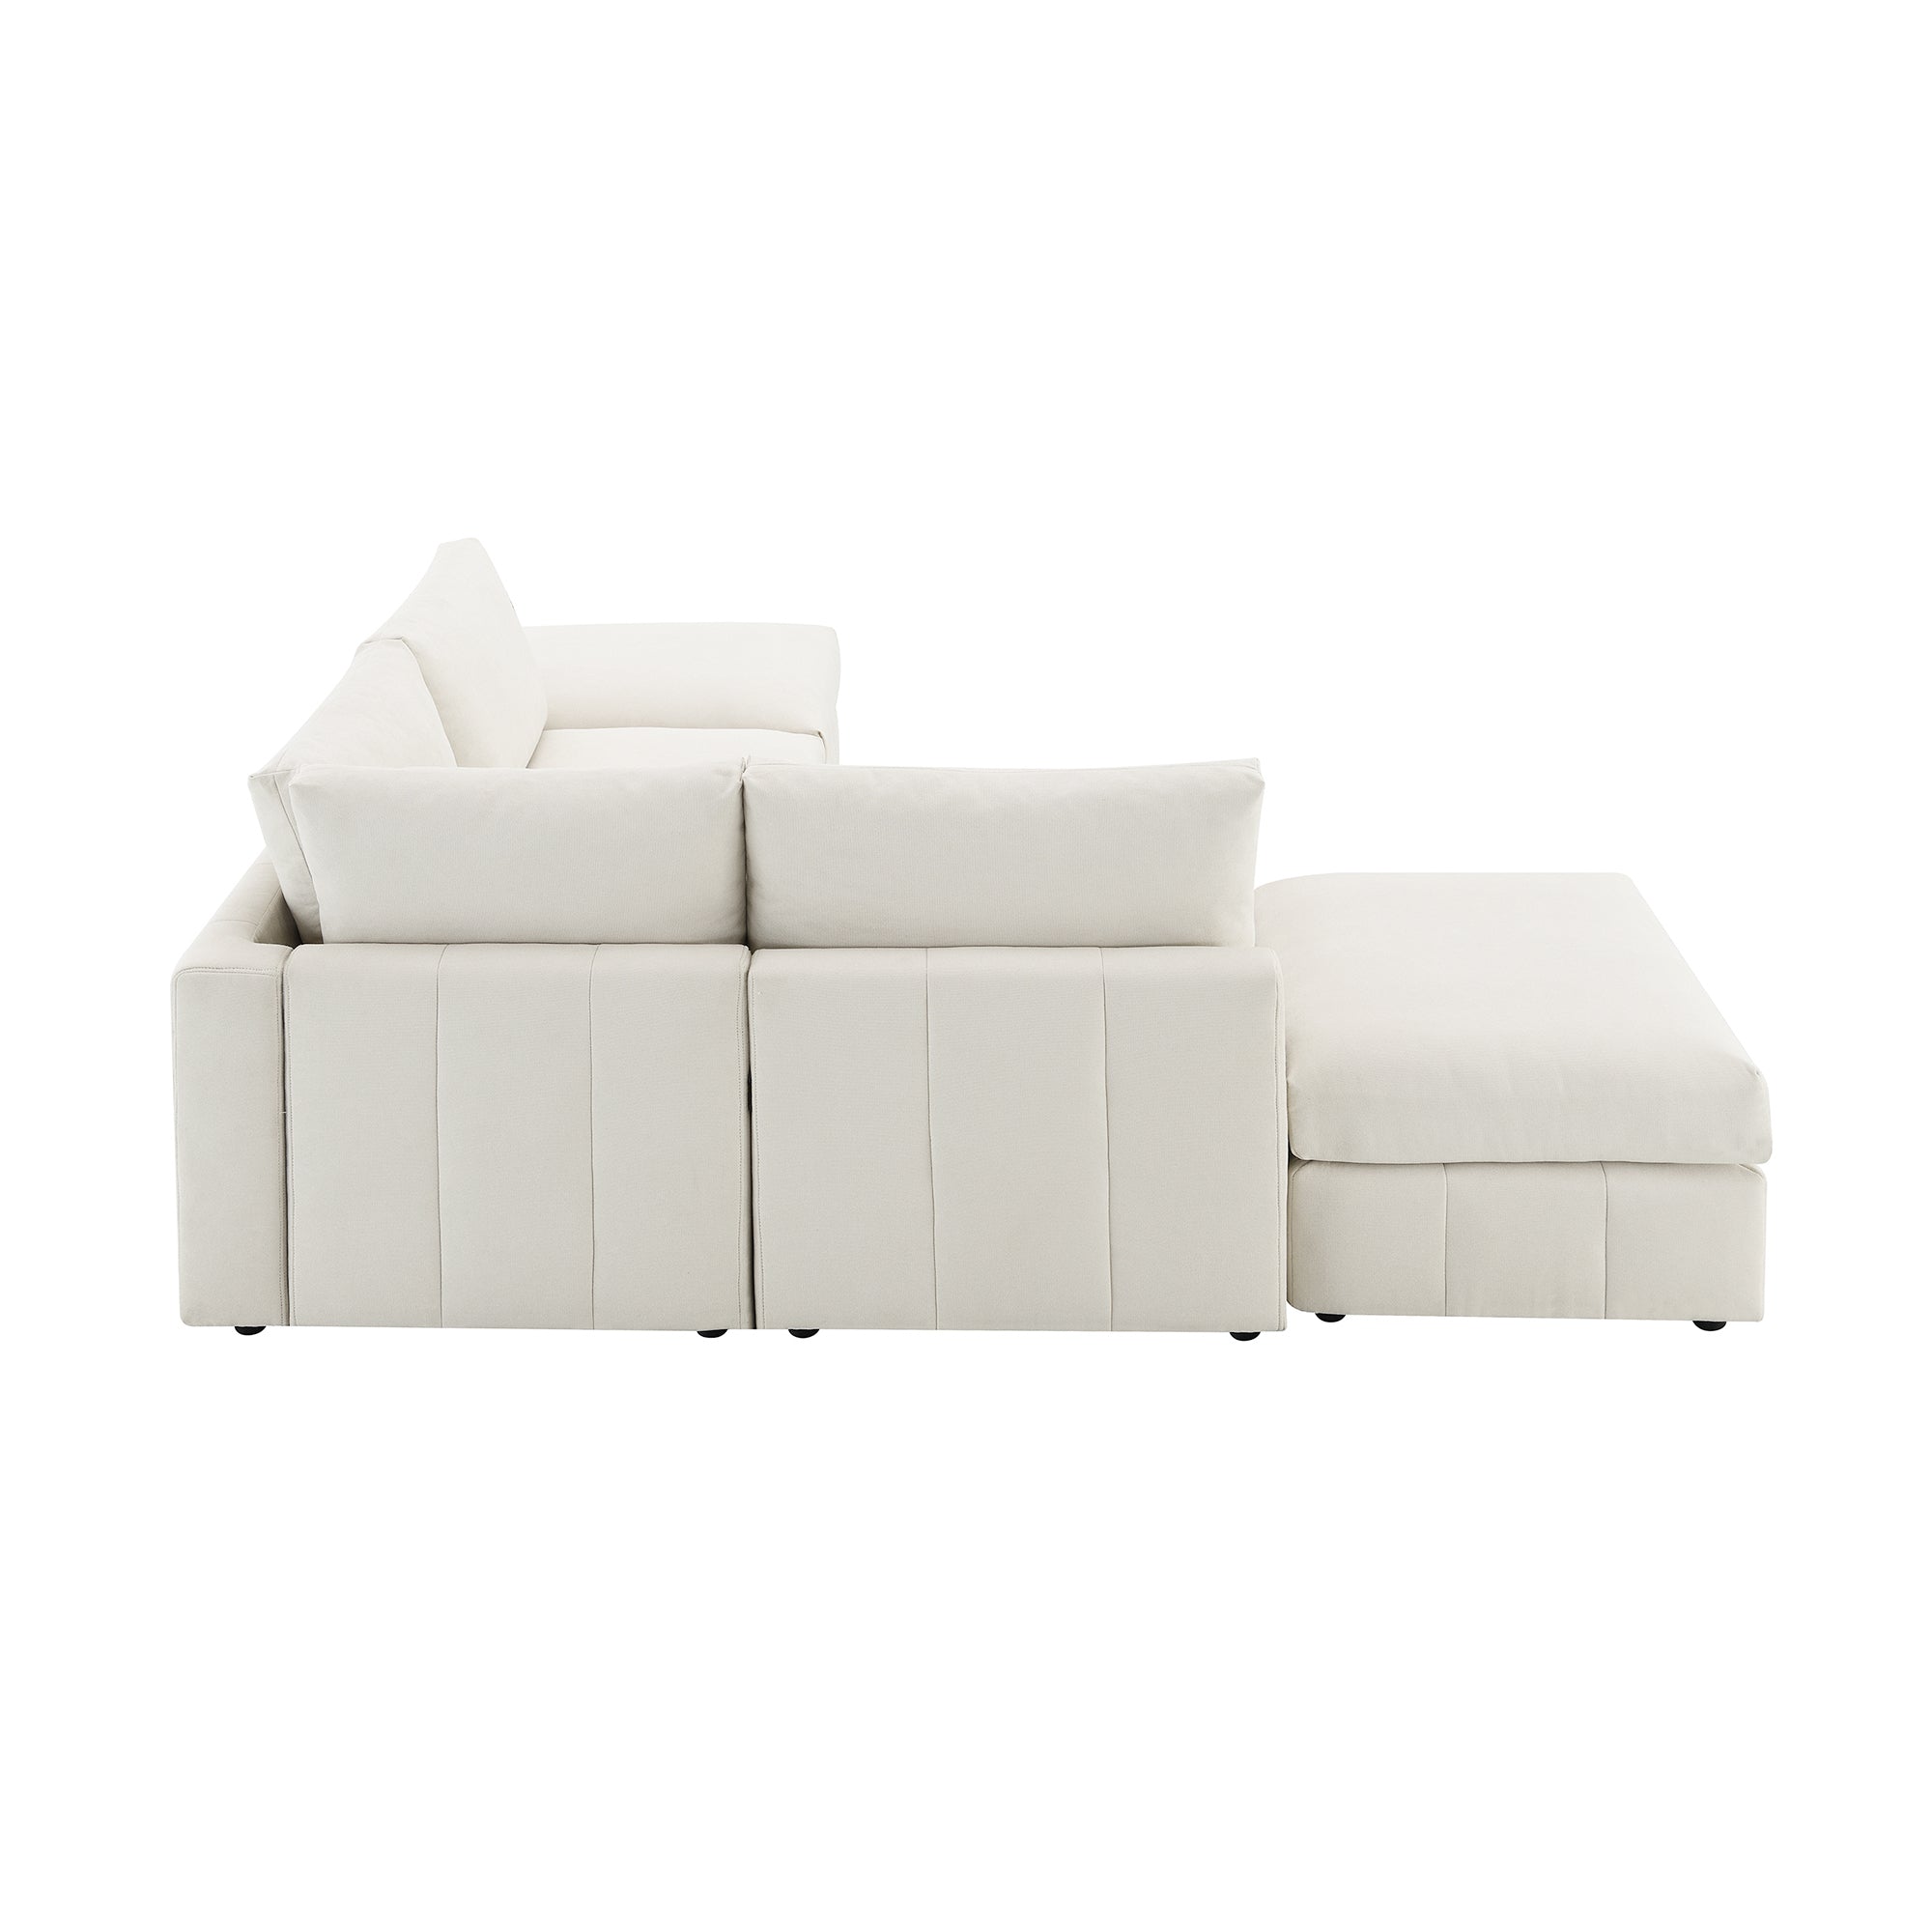 Modern Sectional Sofa with Vertical Stripes & Convertible Ottomans